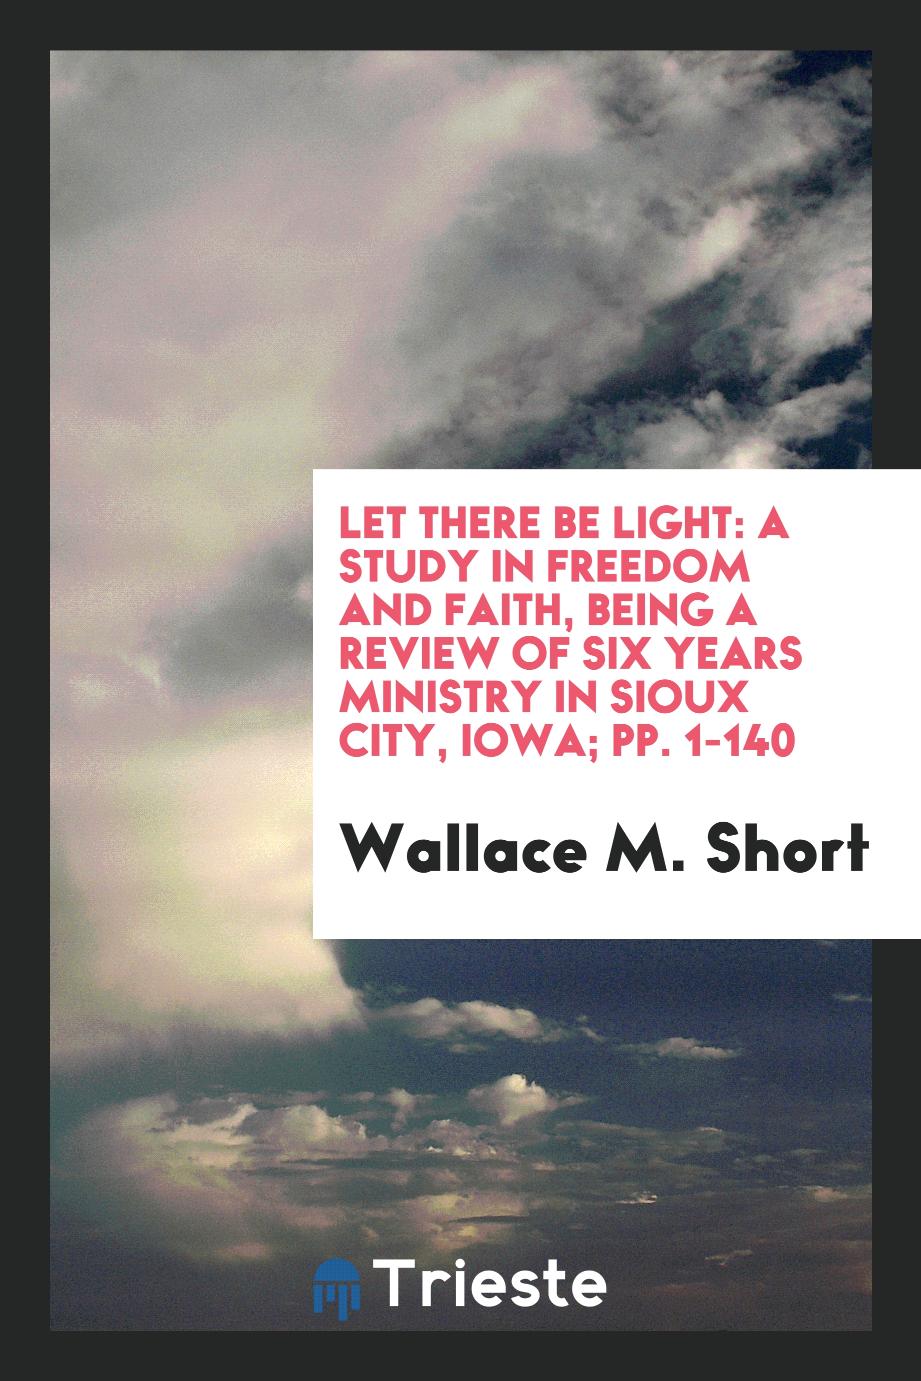 Let There be Light: A Study in Freedom and Faith, Being a Review of Six Years Ministry in Sioux City, Iowa; pp. 1-140